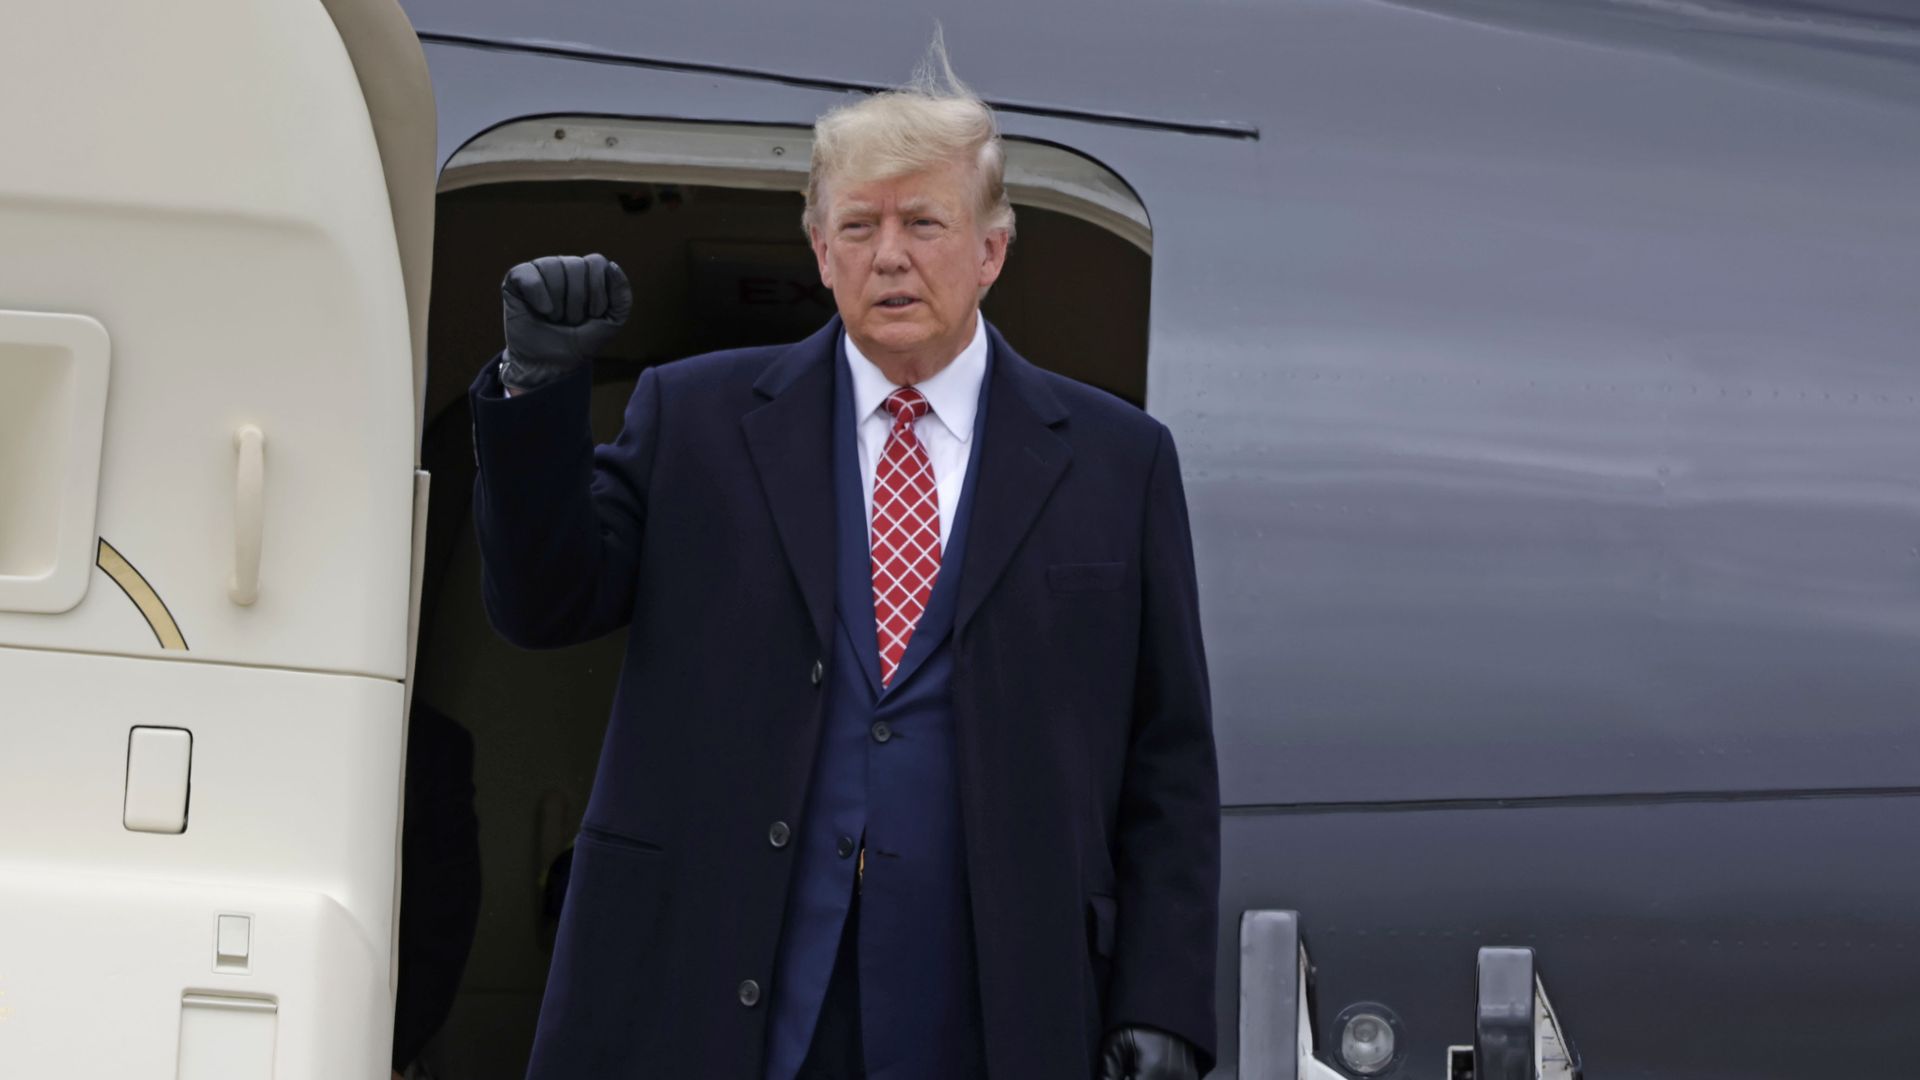 Former U.S. President Donald Trump disembarks his plane "Trump Force One" at Aberdeen Airport on May 1, 2023 in Aberdeen, Scotland.